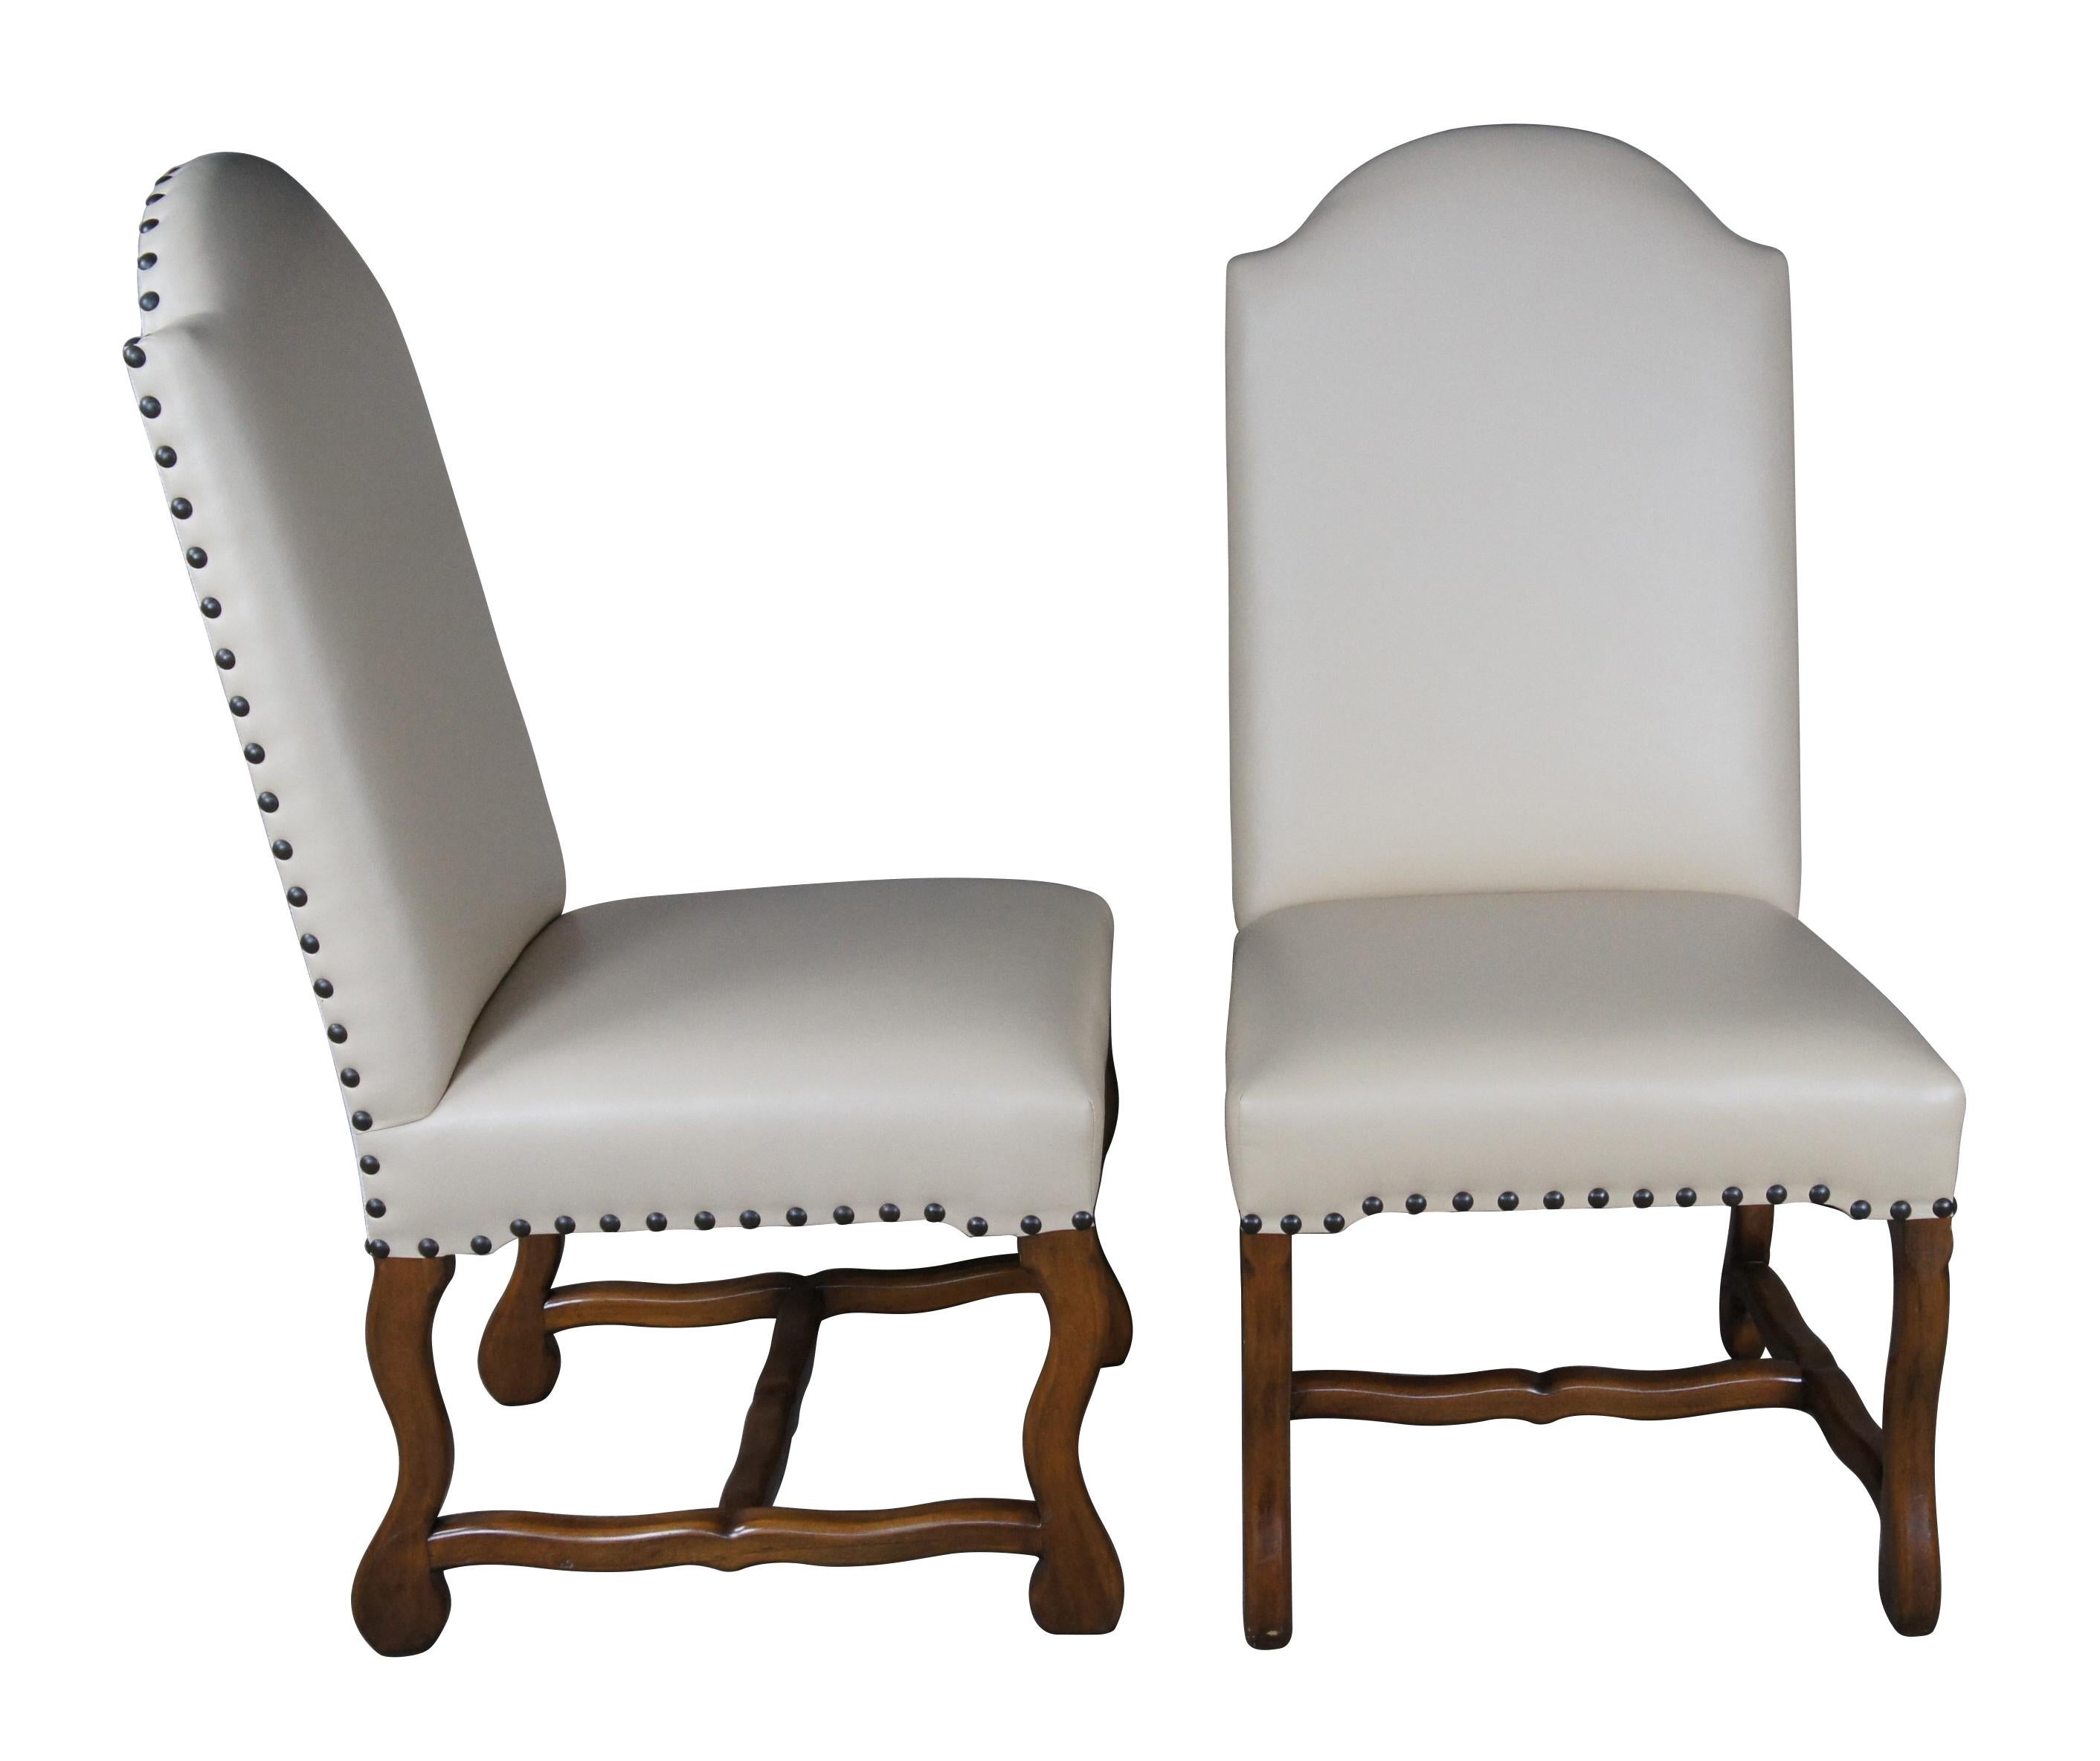 Six Spanish Revival Modern dining chairs featuring domed top with leather seat accented with nailhead trim and linen back, supported by serpentine legs connected by H stretcher.

Dimensions:
22